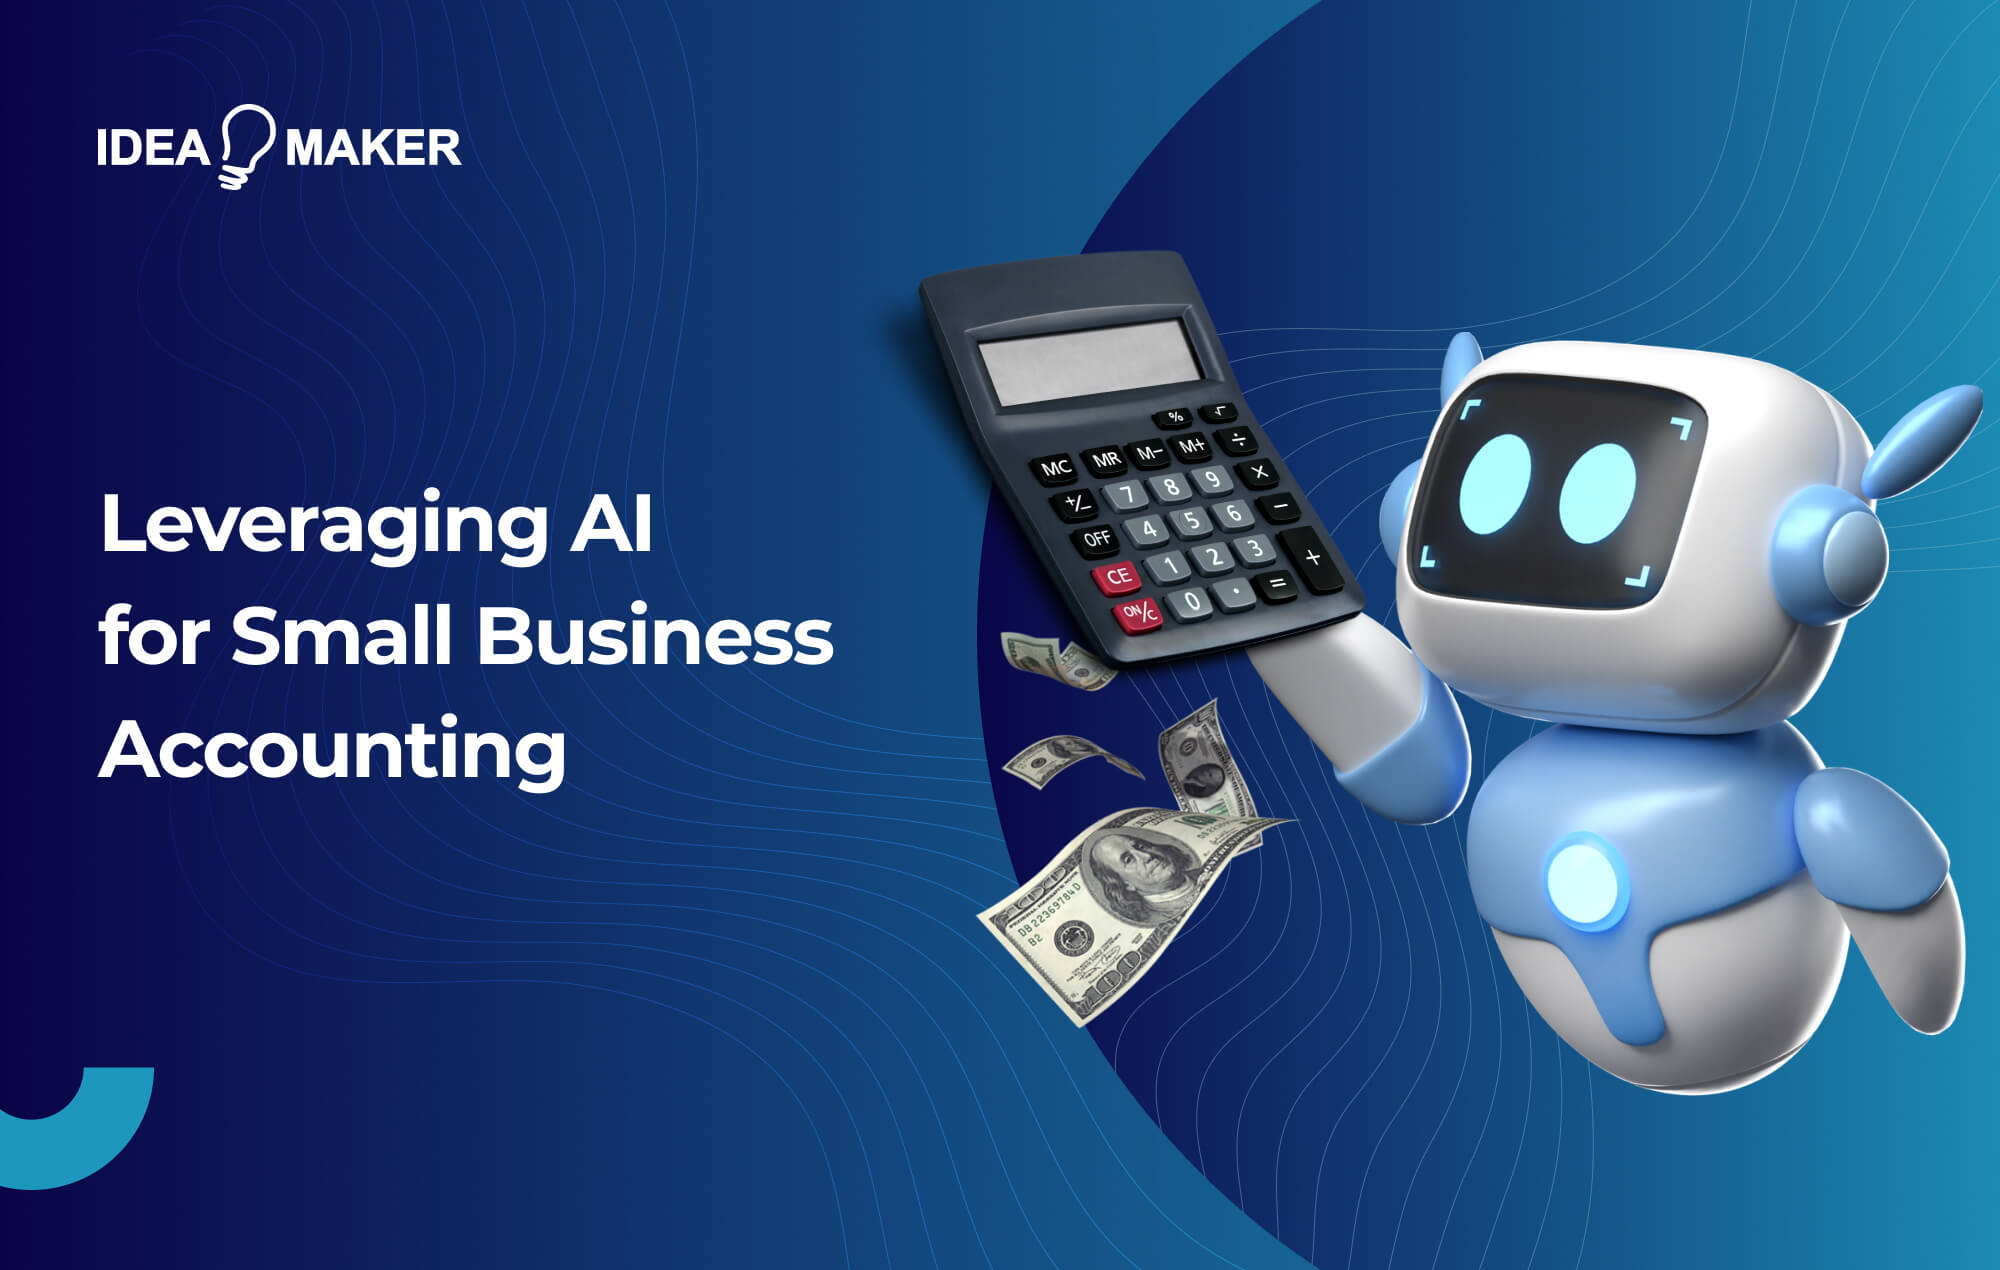 Ideamaker - Leveraging AI for Small Business Accounting